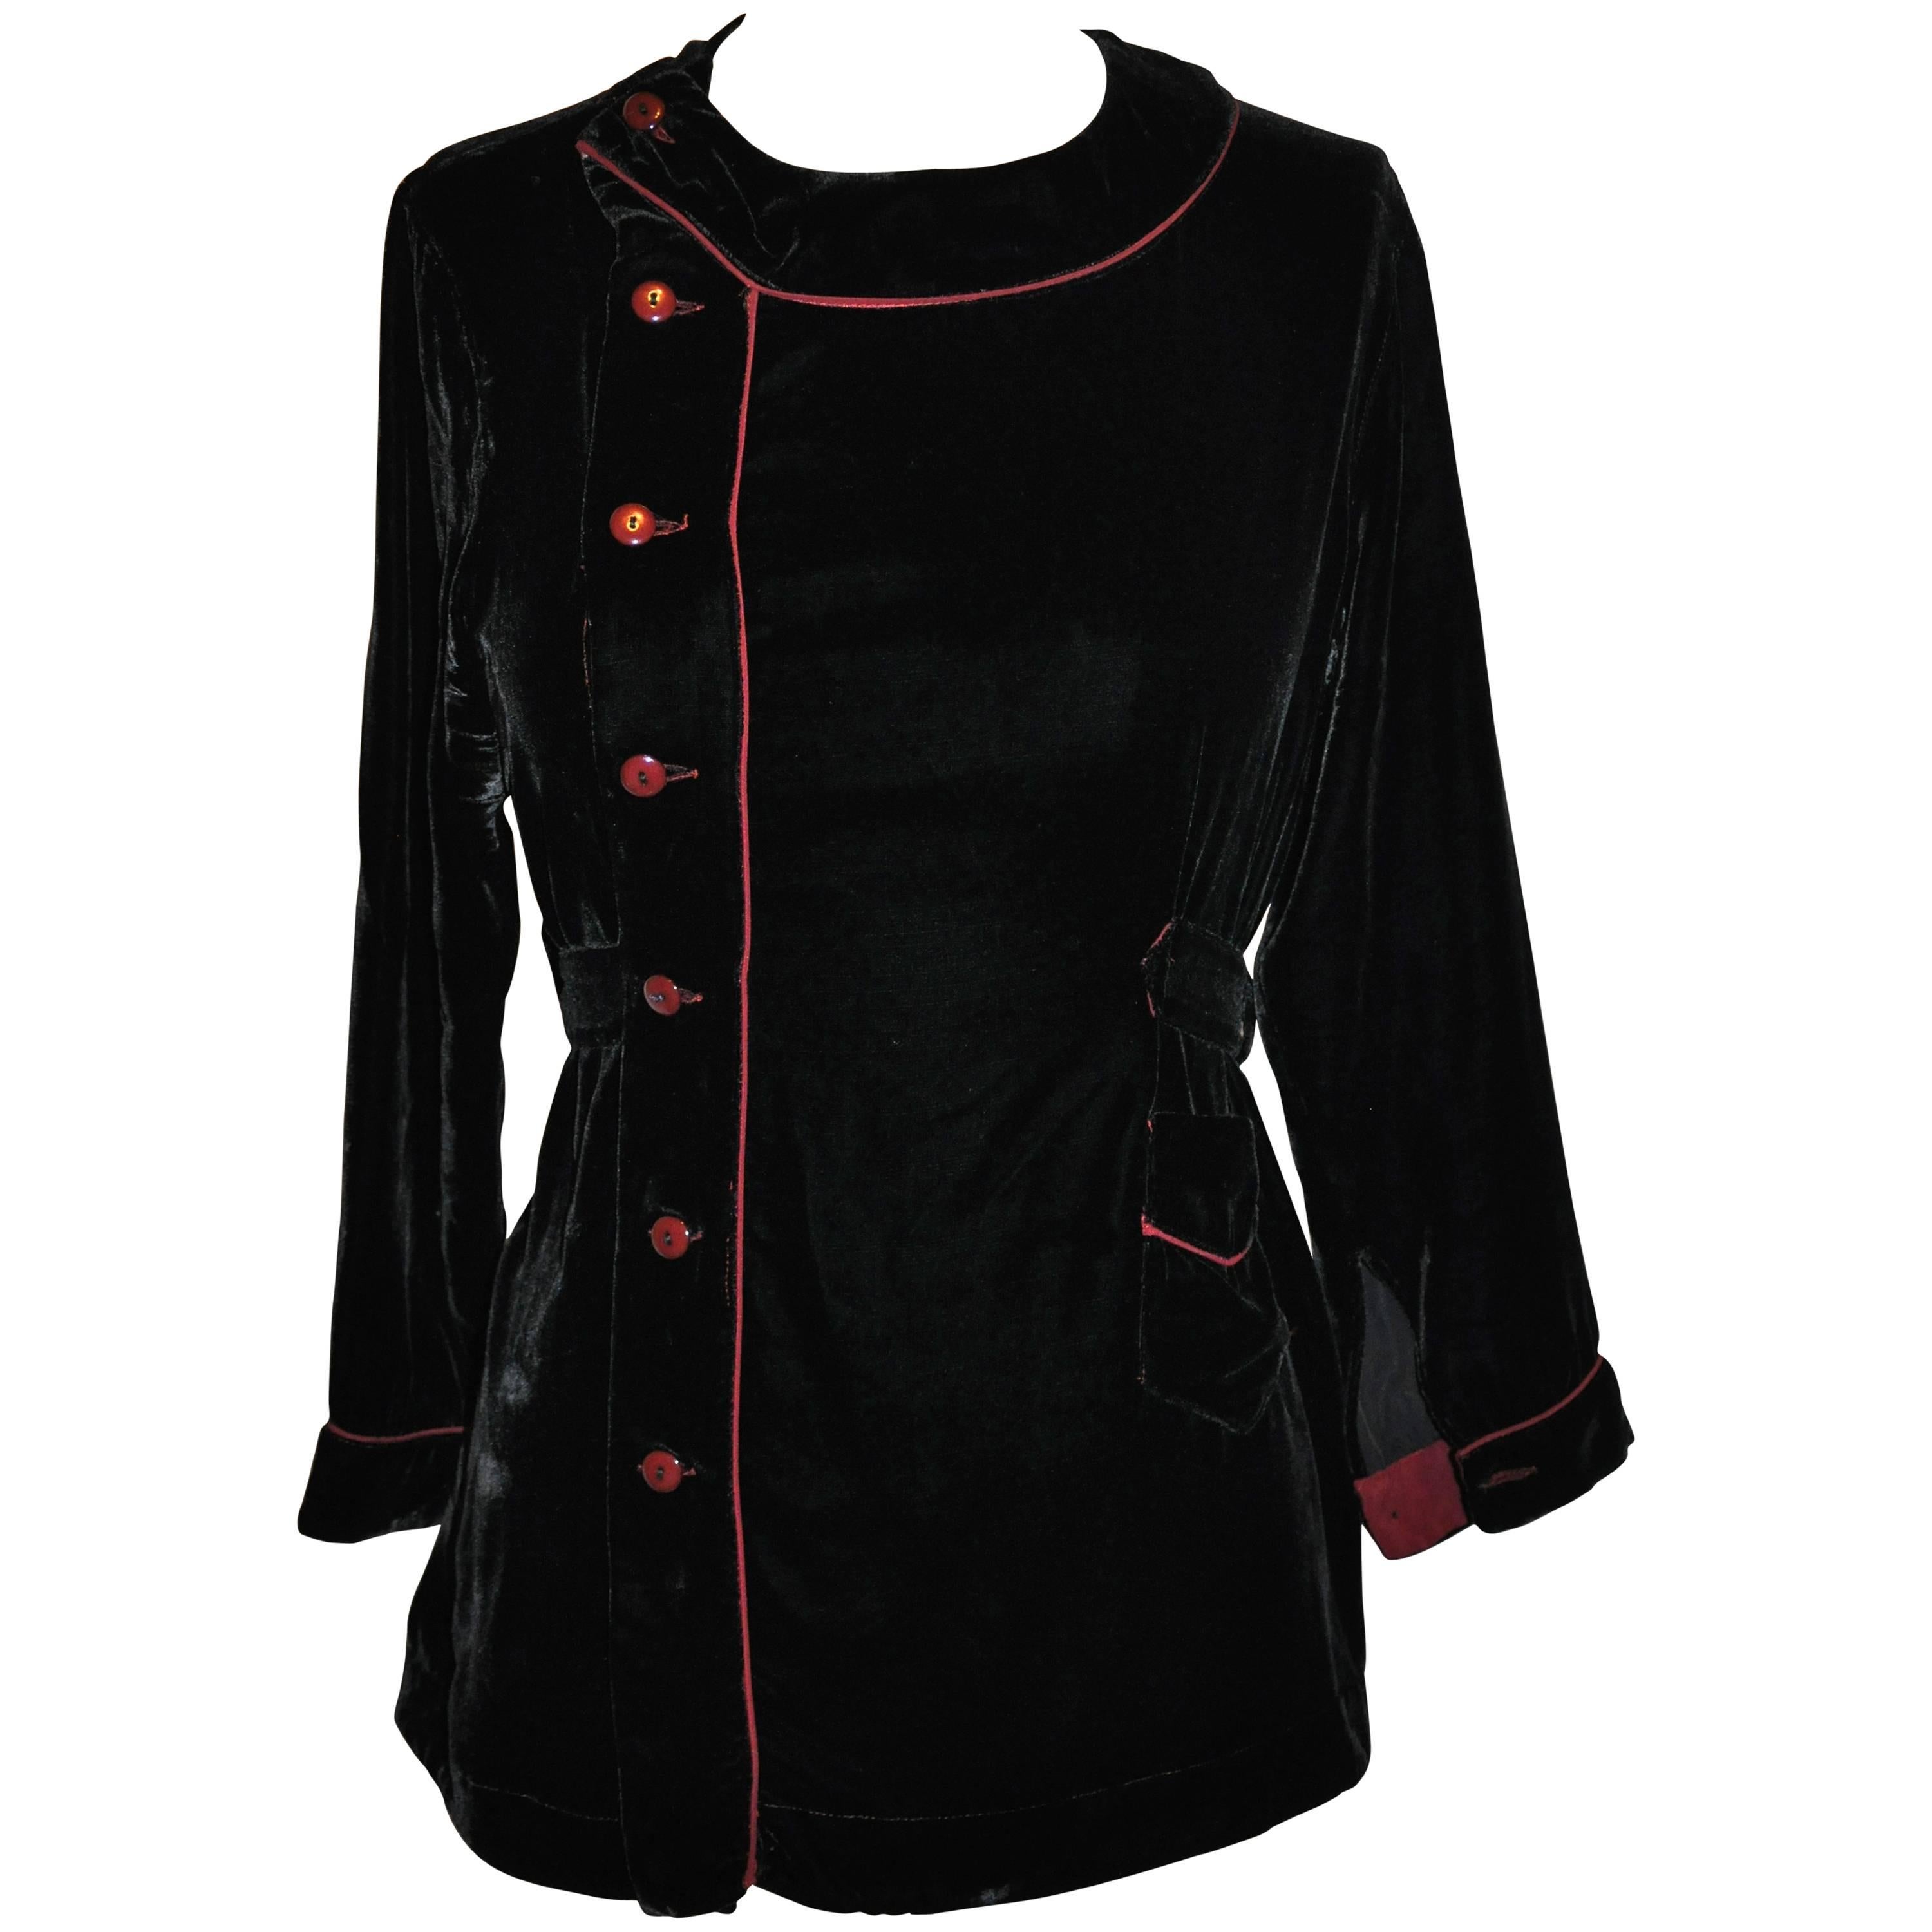 Jean Paul Gaultier Black Velvet with Piping Button Top For Sale